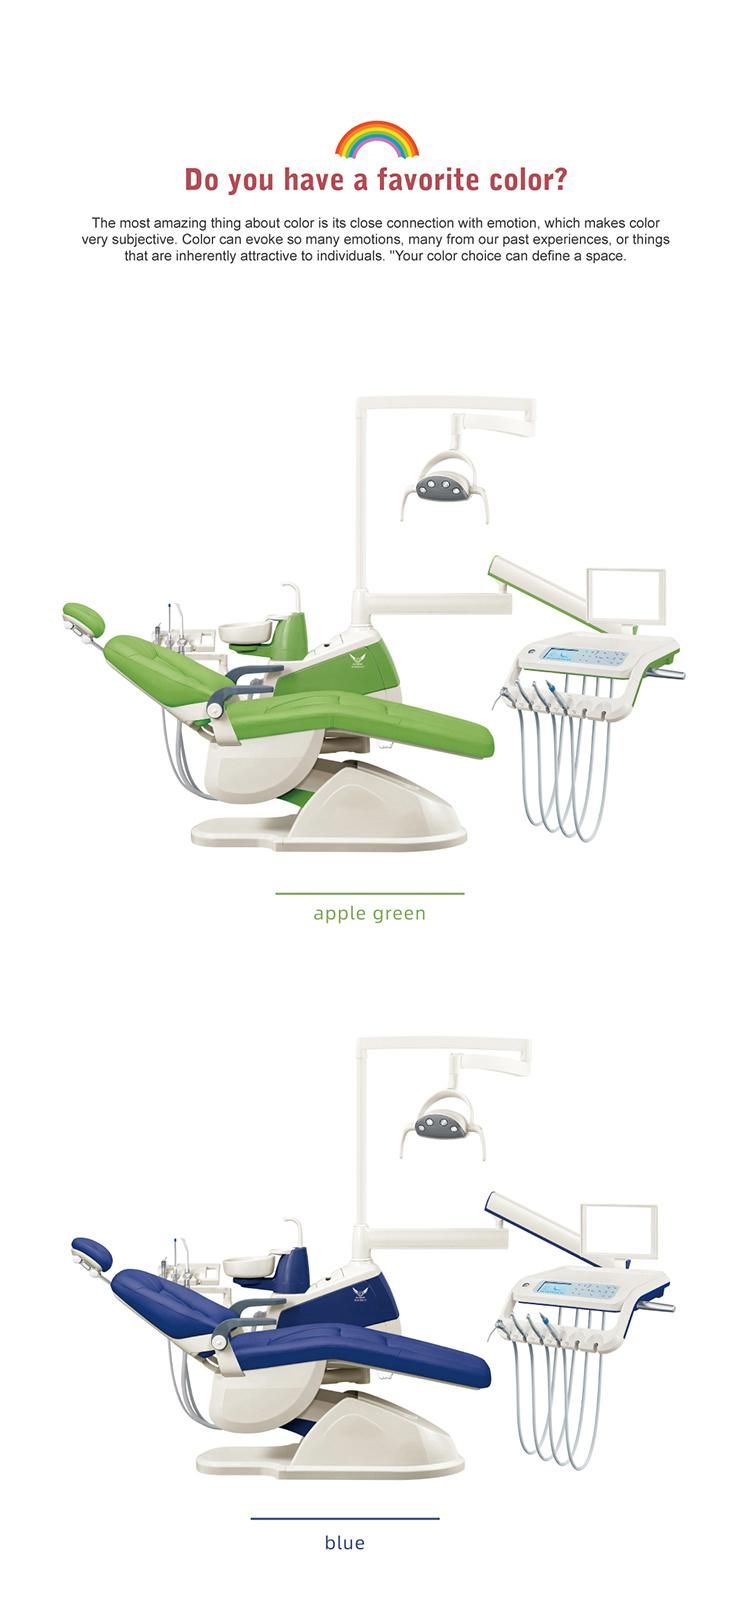 Top Quality ISO Approved Dental Chair Dental Clinic Furniture Catalogue/Galaxy Dental Chair/Dental Hygiene Stools